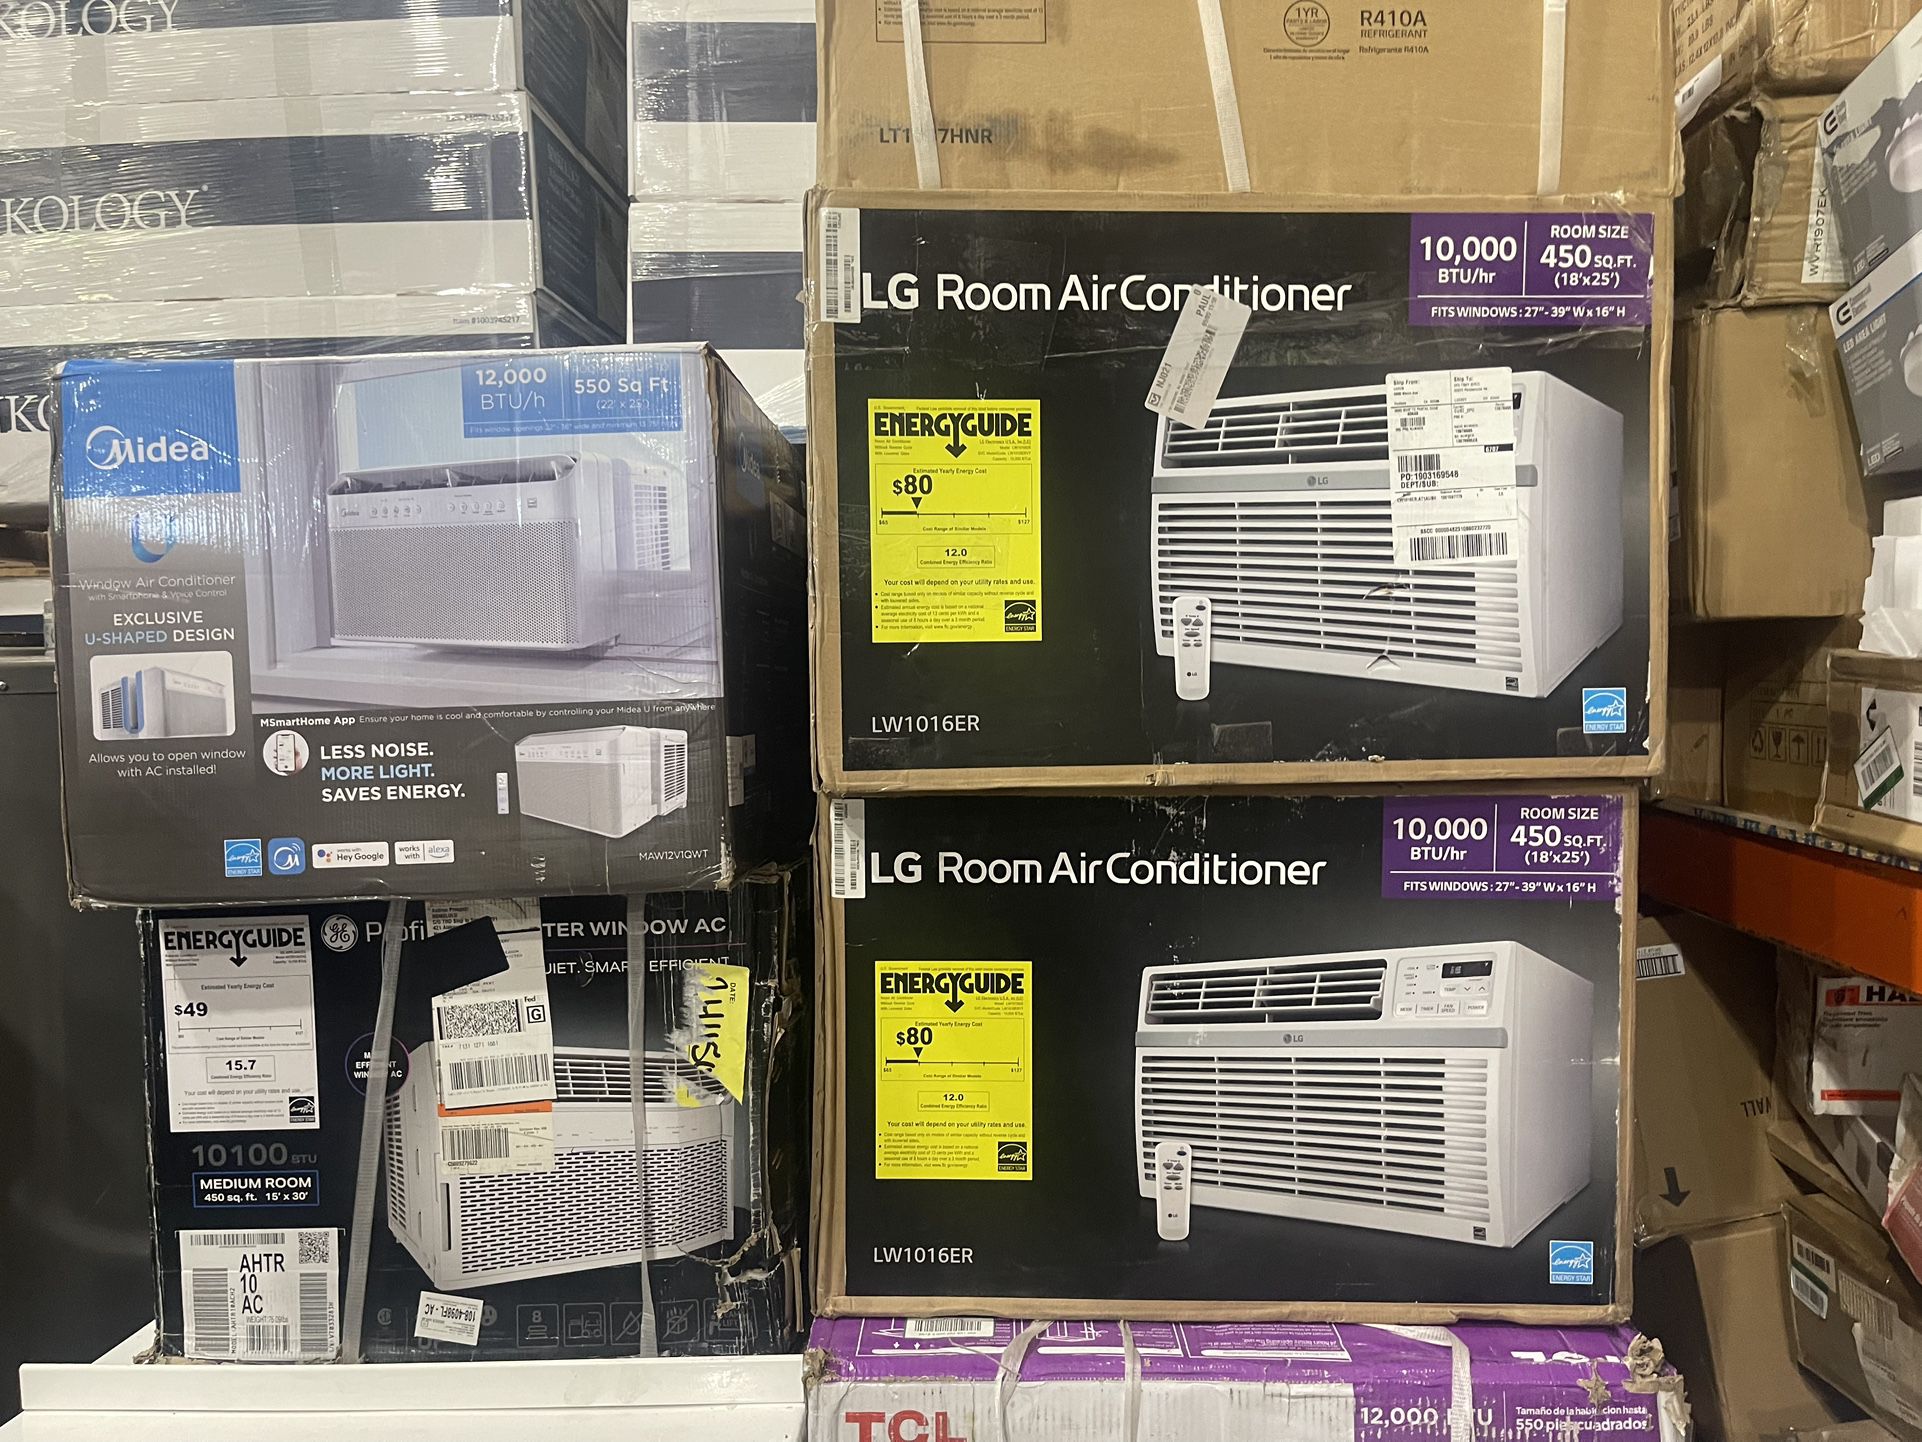 Window Airconditioners, Portable Airconditioners, Humidifiers $100-$600